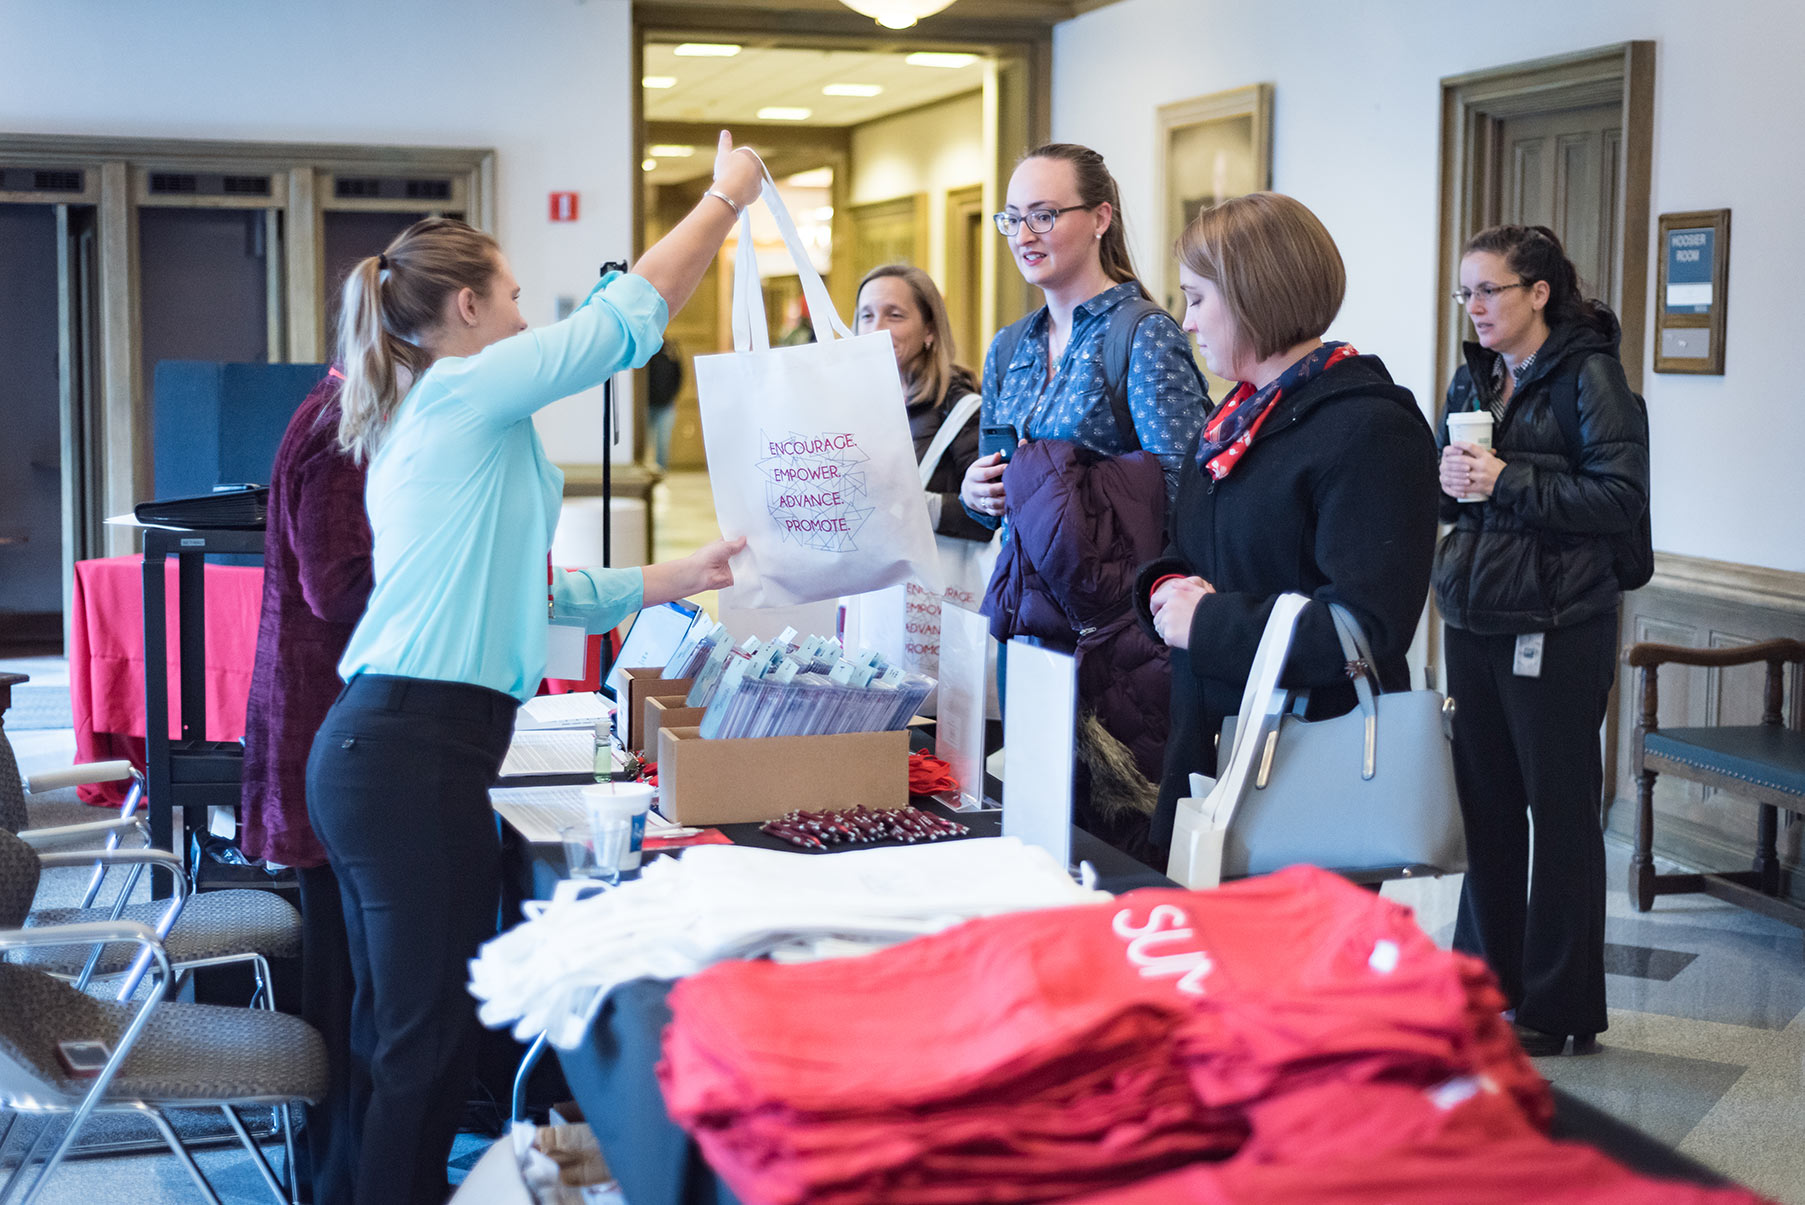 A woman hands over a swag bag to a registrant at the CEW&T conference. The bag has the words Encourage, empower, advance, promote printed on it.